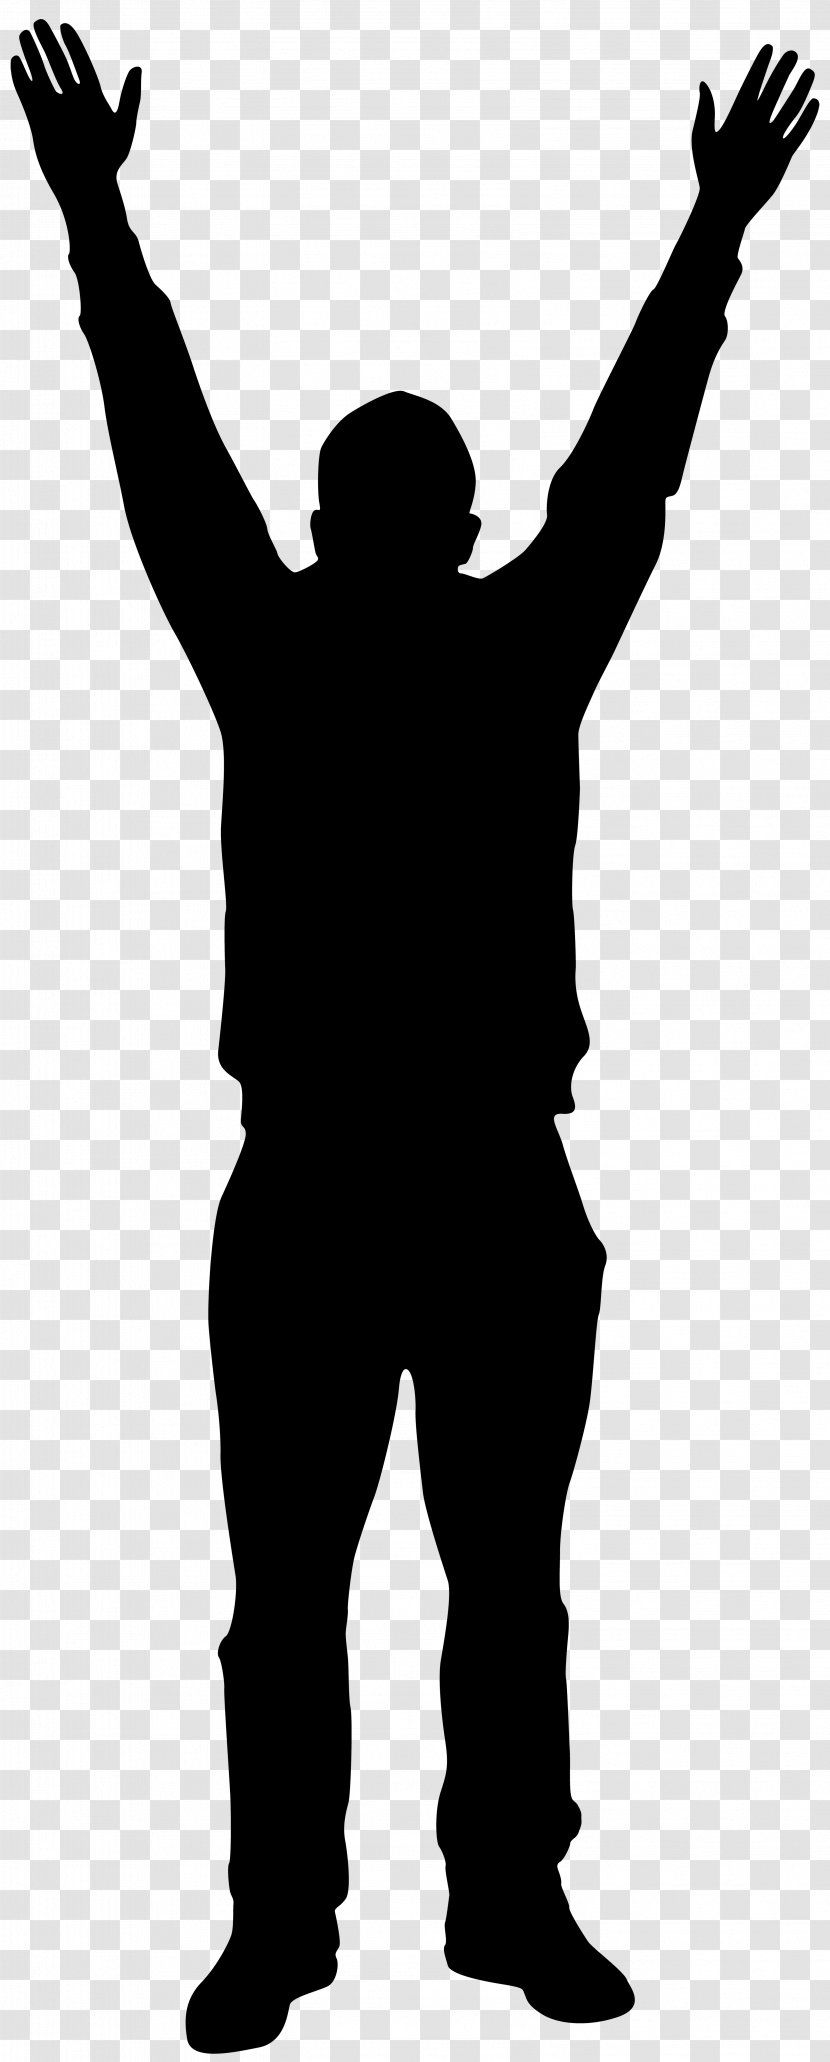 Silhouette Man Clip Art - Holding Hands - With Up Image Transparent PNG